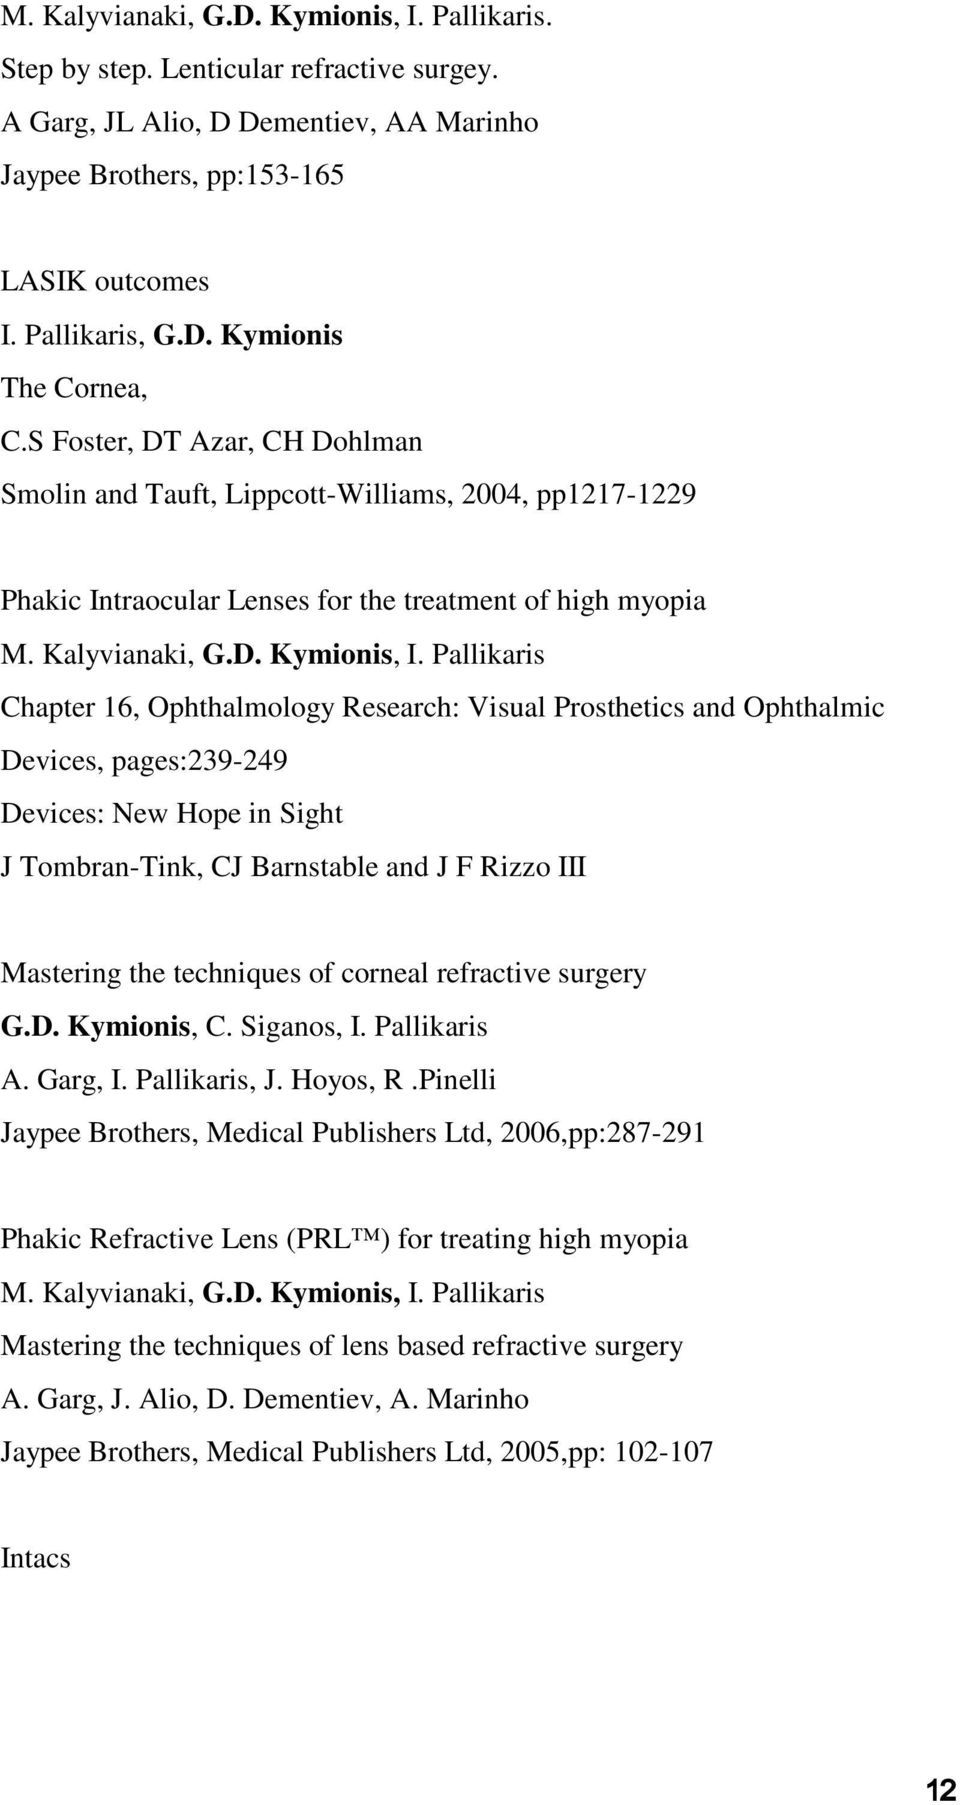 Pallikaris Chapter 16, Ophthalmology Research: Visual Prosthetics and Ophthalmic Devices, pages:239-249 Devices: New Hope in Sight J Tombran-Tink, CJ Barnstable and J F Rizzo III Mastering the